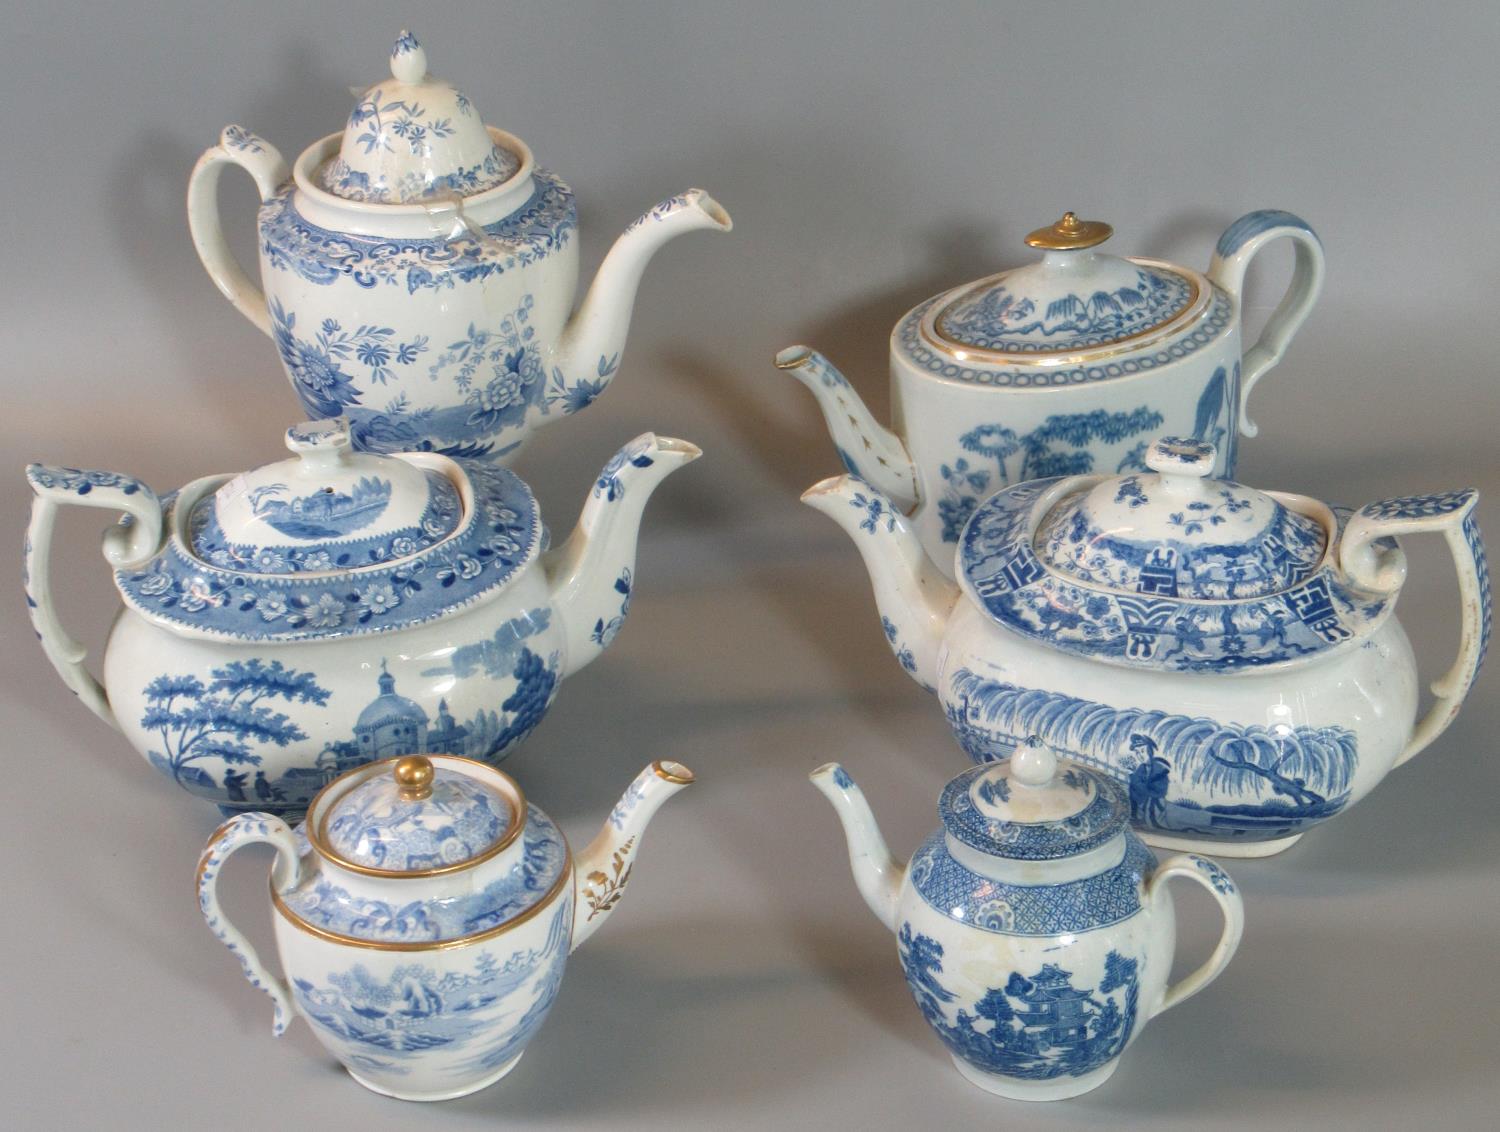 Collection of 19th century Spode blue and white transfer printed china tea and coffee pots to